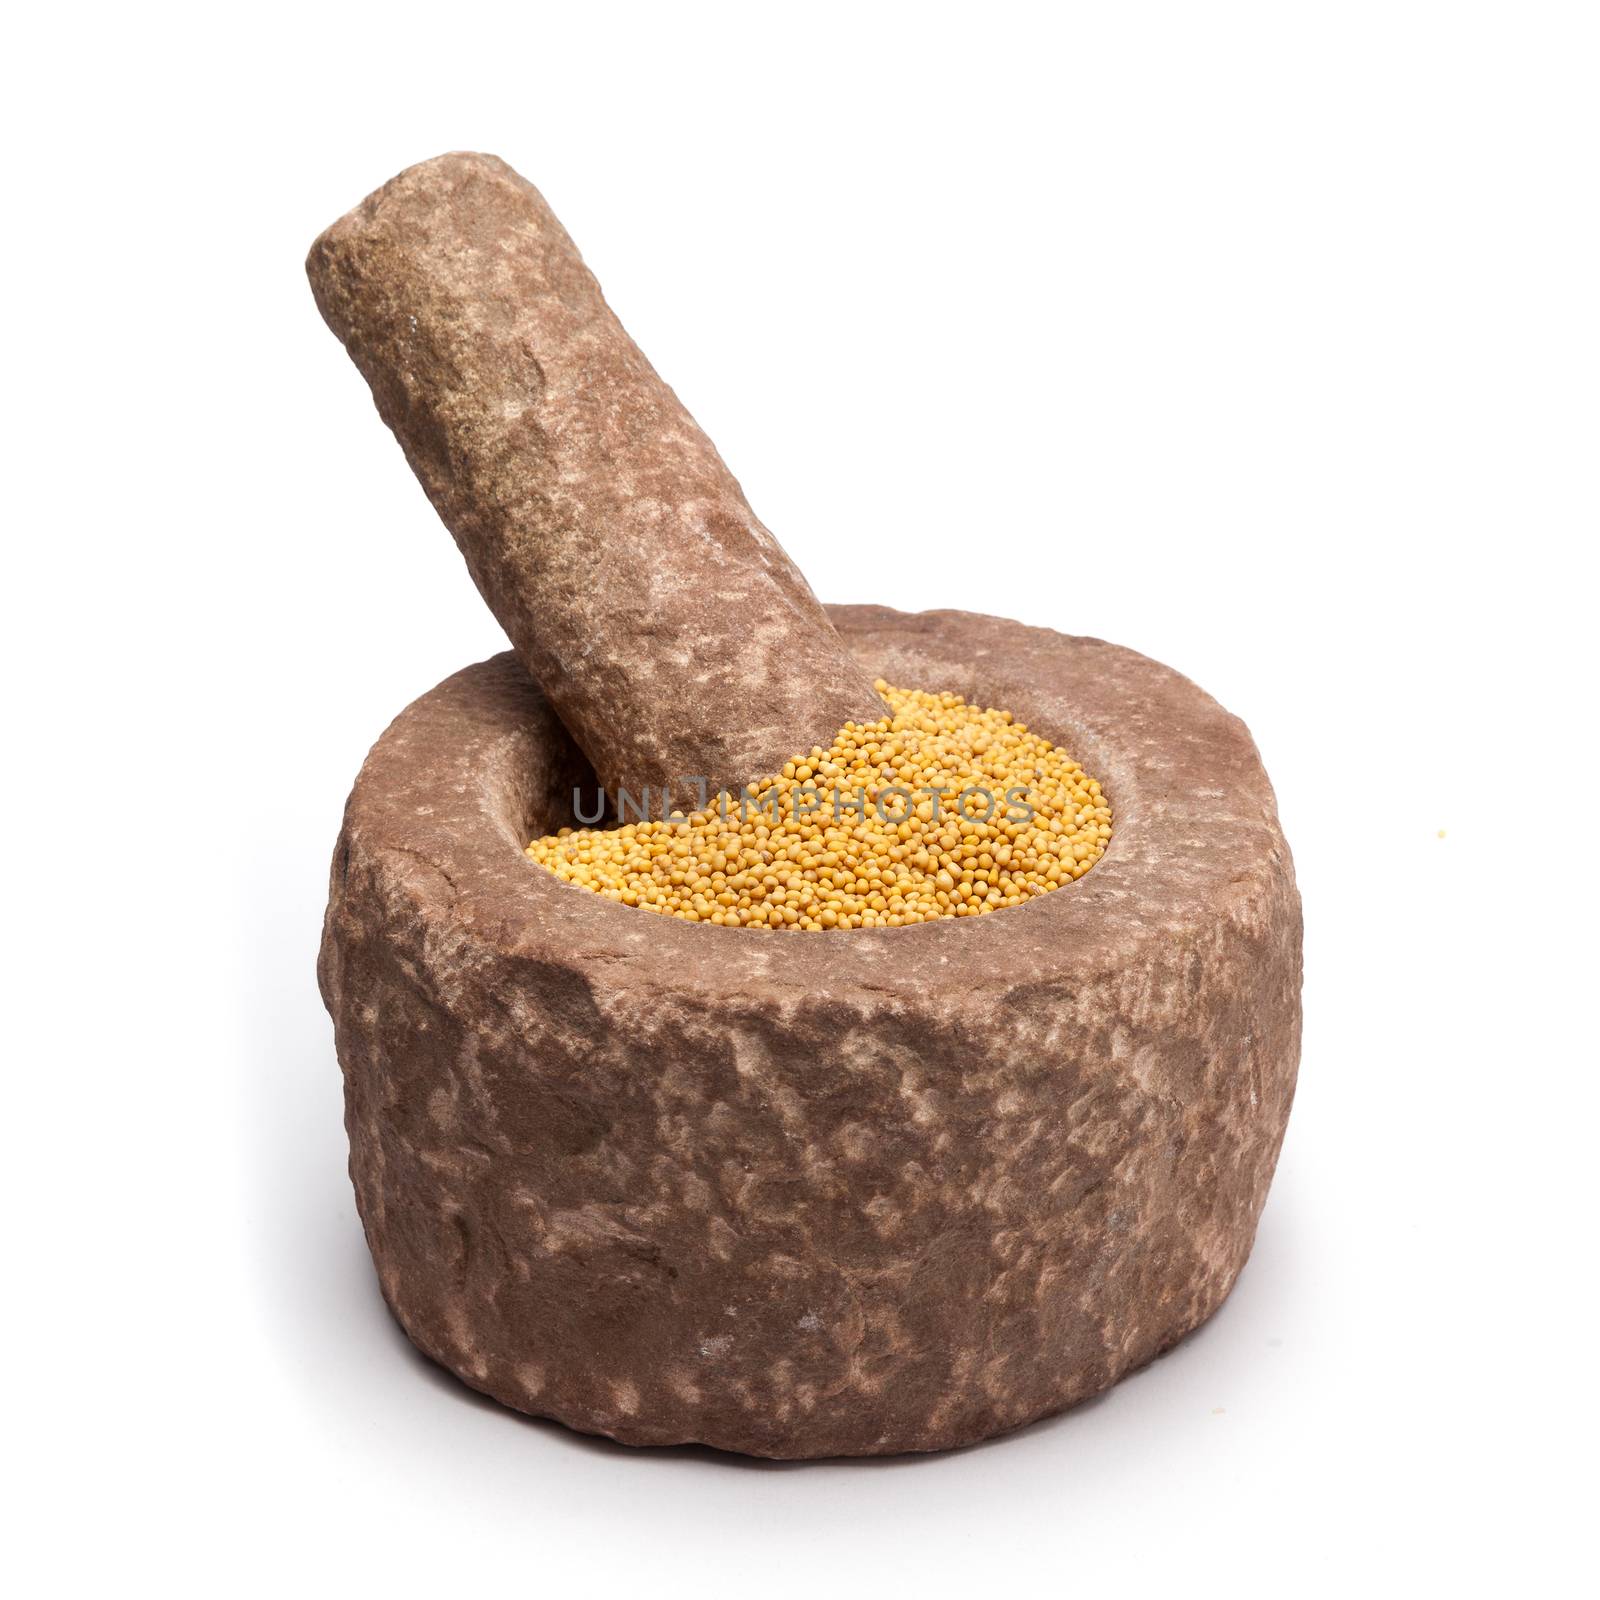 Organic yellow mustard (Brassica alba) in mortar with pestle, isolated on white background.